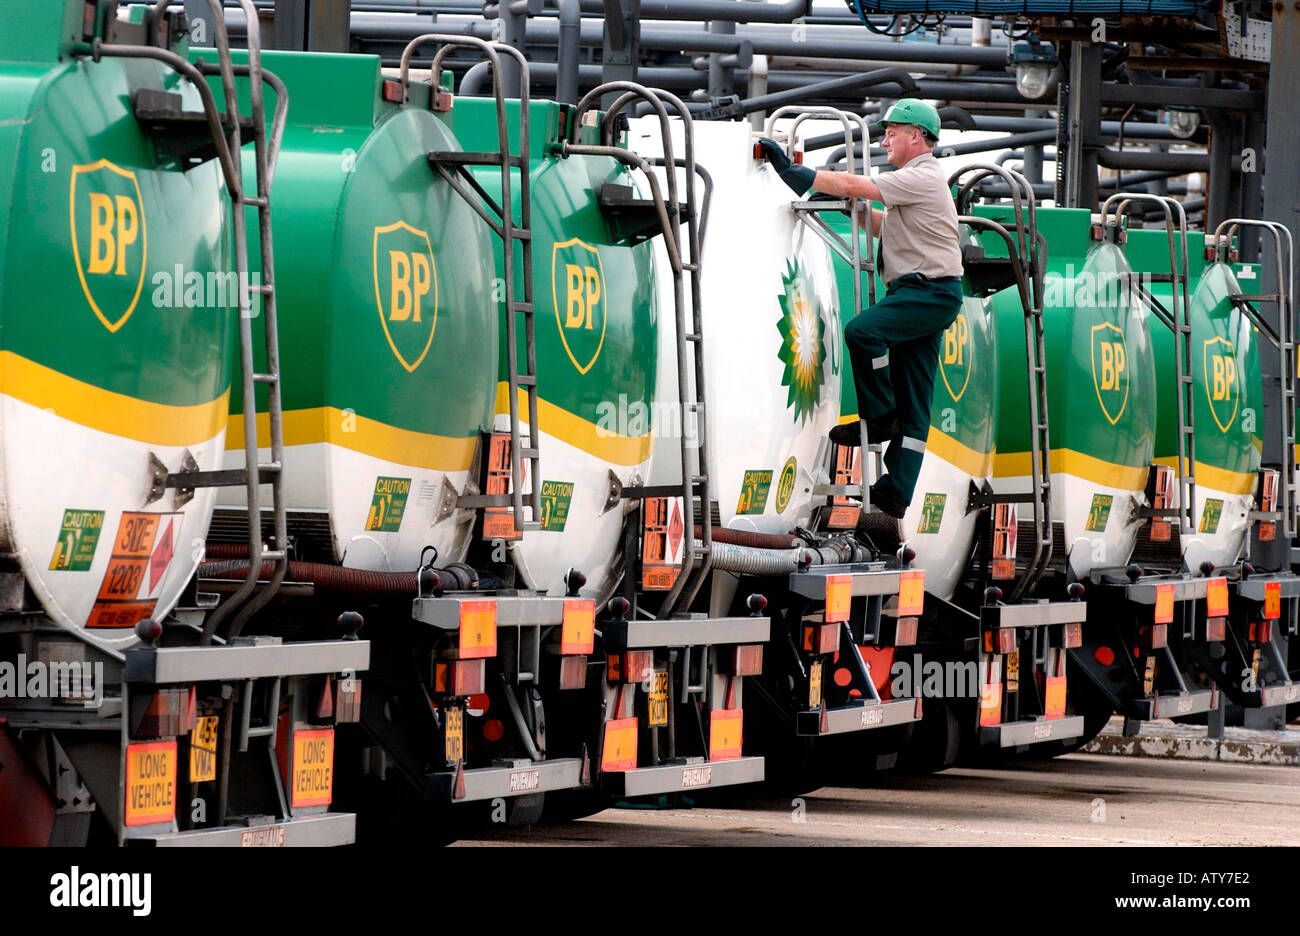 BP tankers lined up for inspecton with BP employee checking them over. Stock Photo